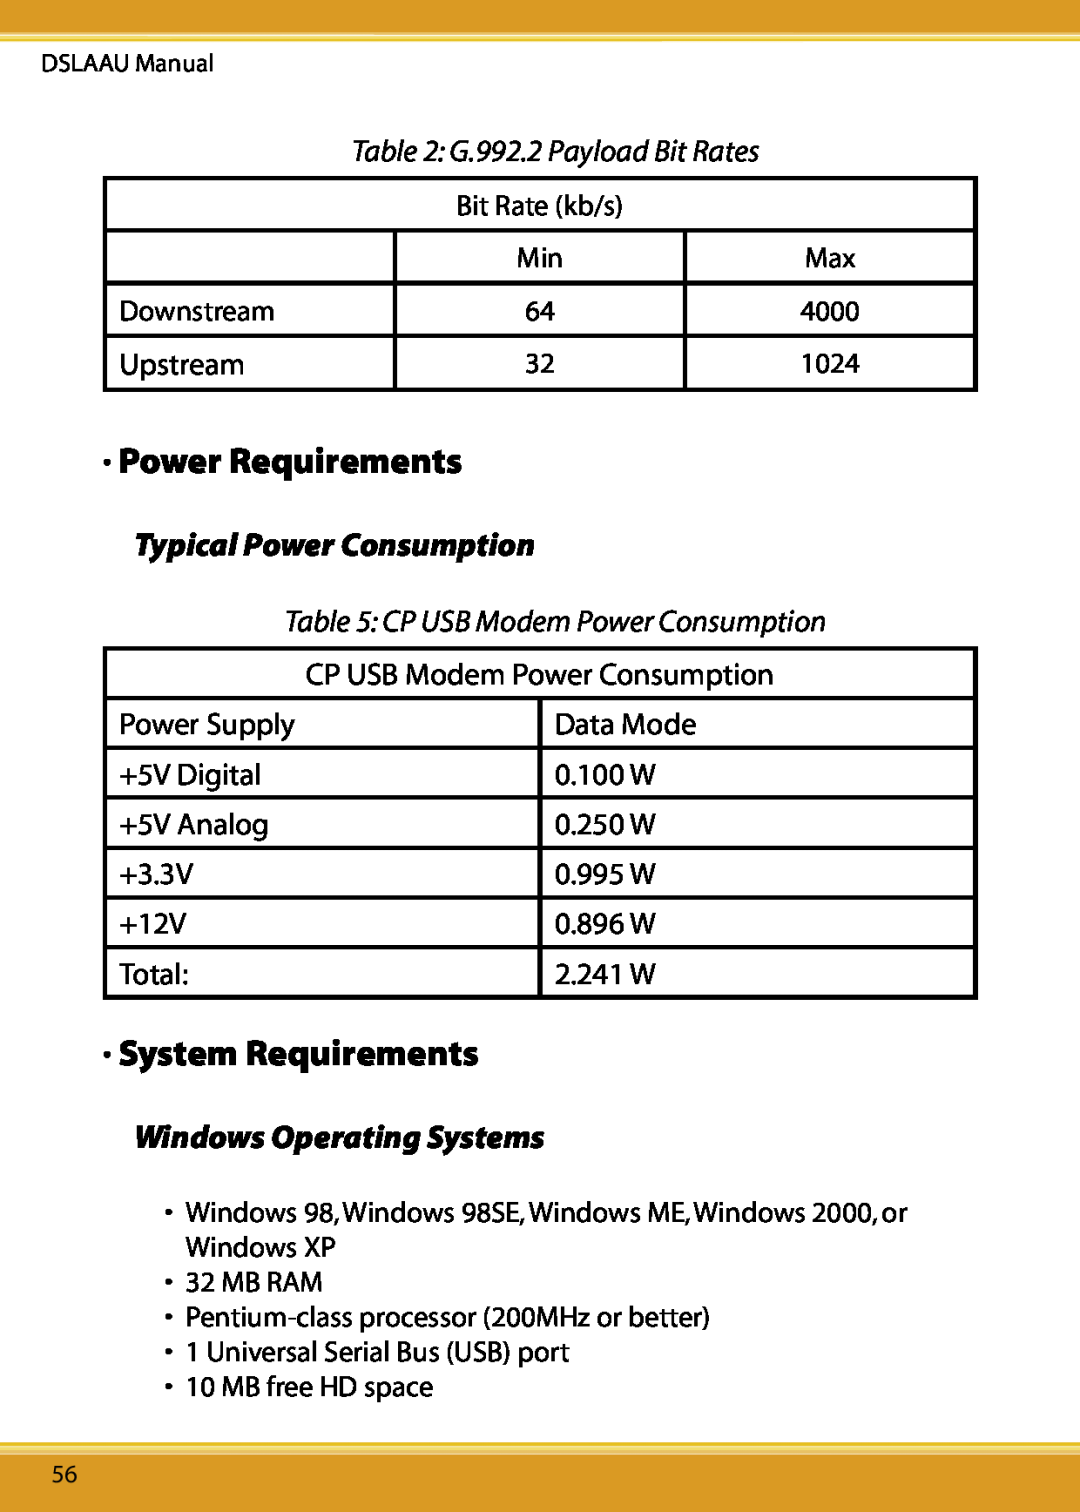 Corega DSLAAU user manual Power Requirements, System Requirements, Typical Power Consumption, Windows Operating Systems 